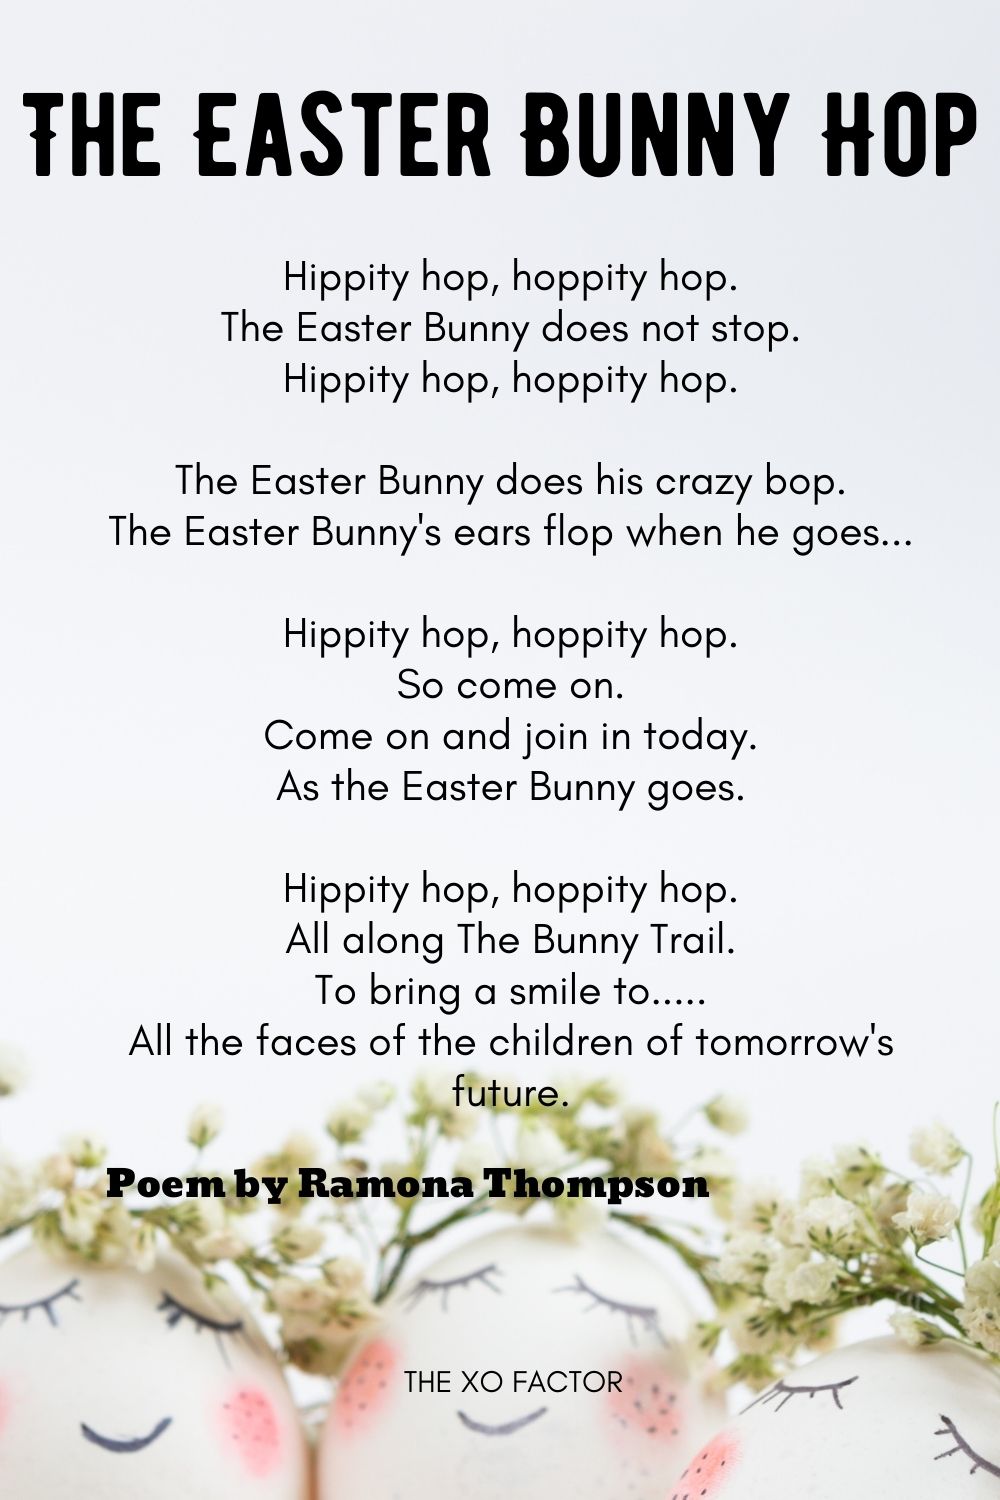 The Easter Bunny Hop Poem by Ramona Thompson